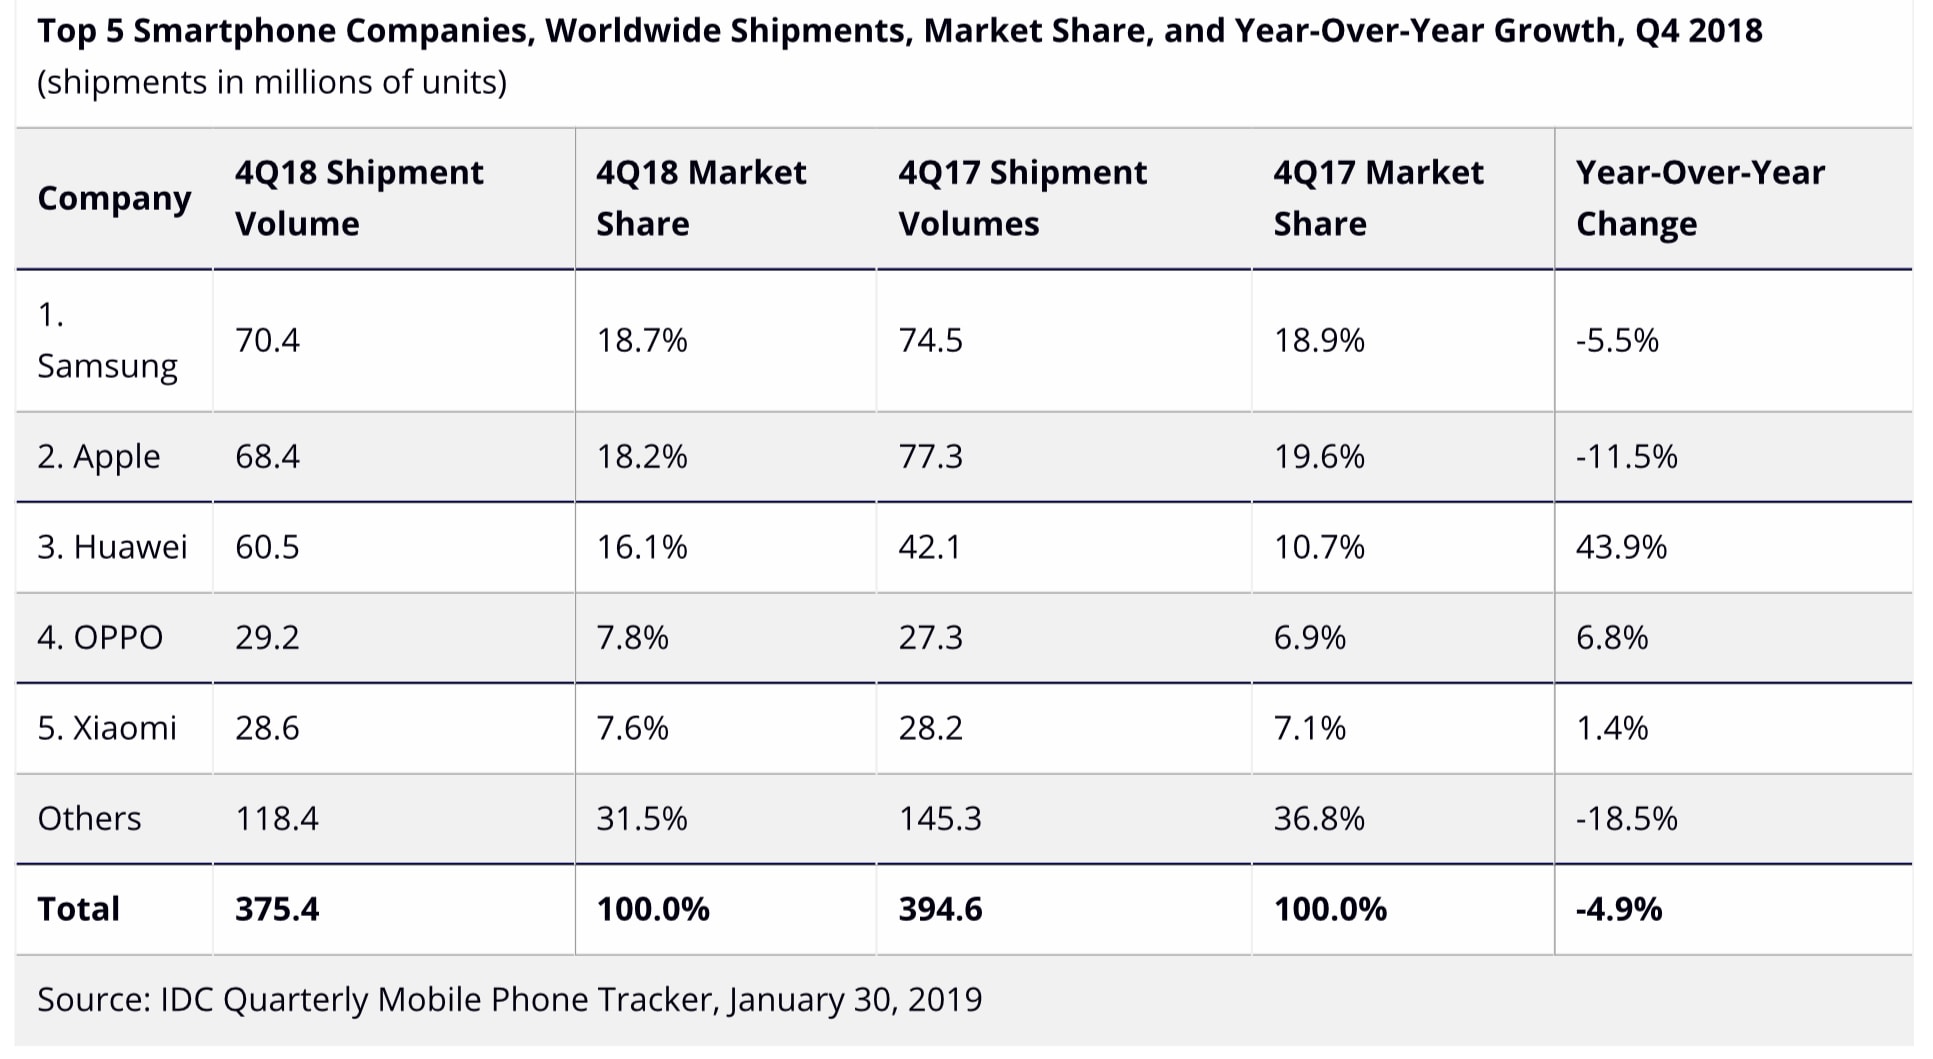 IDC’s estimated Q4 2018 smartphone shipments for the top 5 companies.